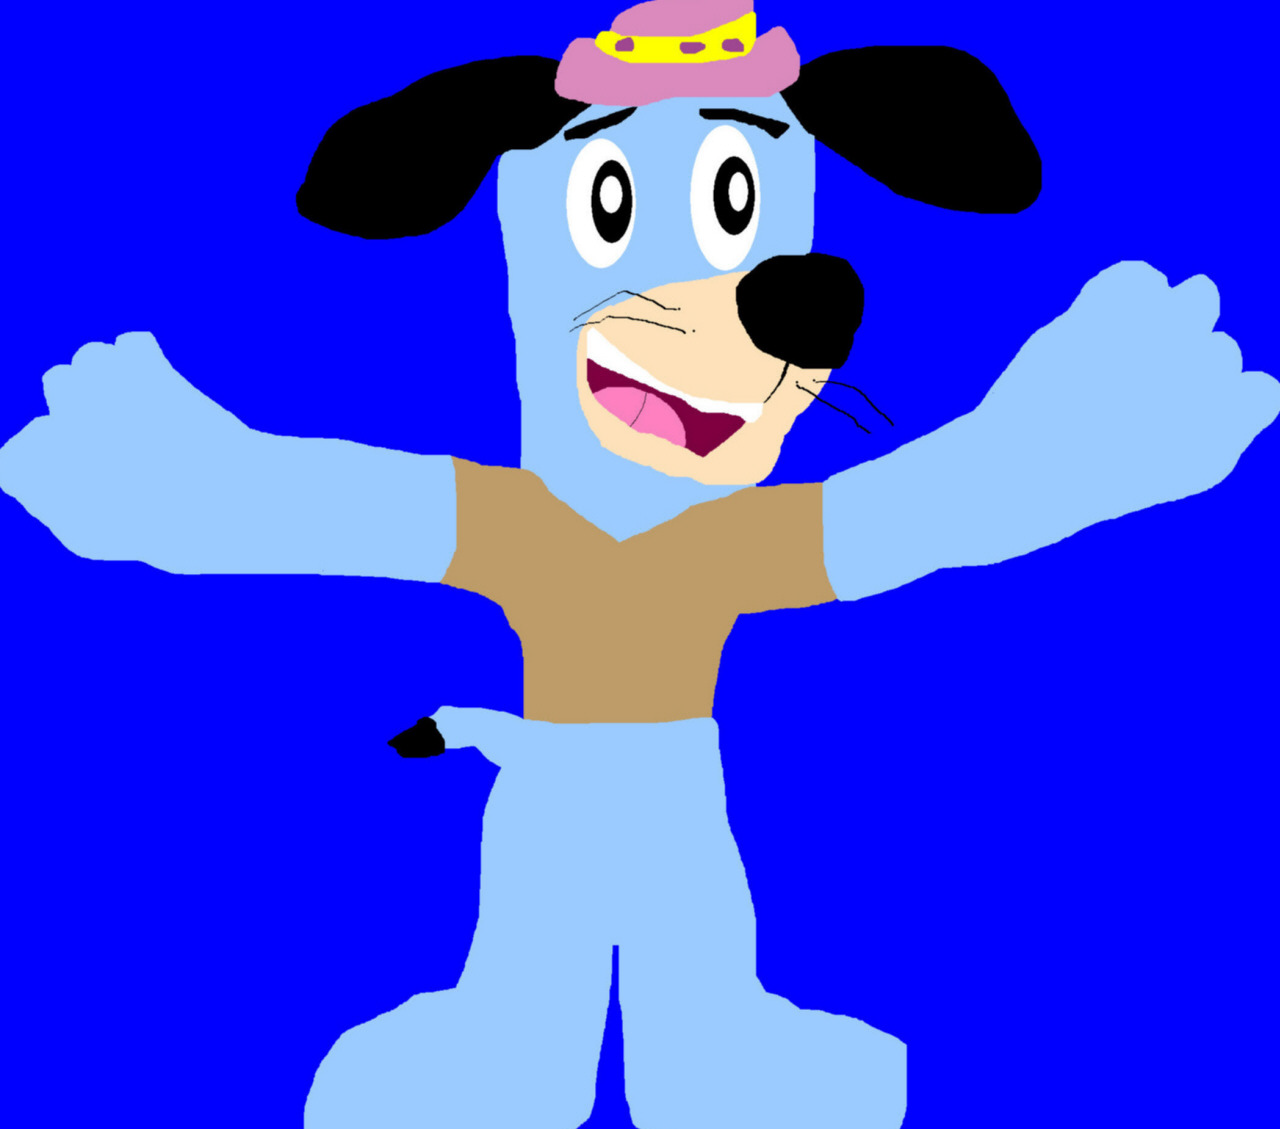 Huckleberry Hound In Squidward's Shirt Request MS Paint by Falconlobo